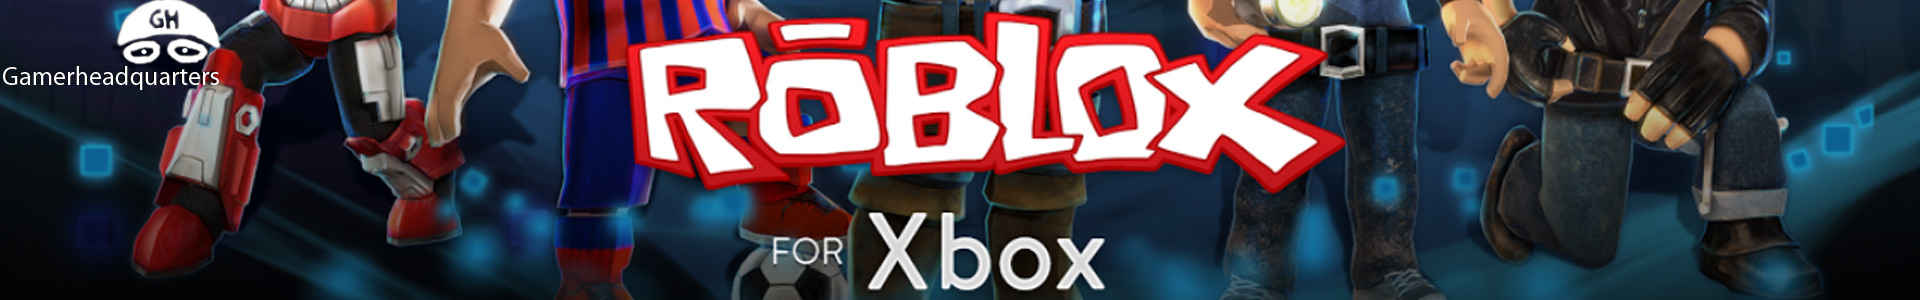 Roblox Xbox One Games List Gamerheadquarters - list of roblox games on xbox one